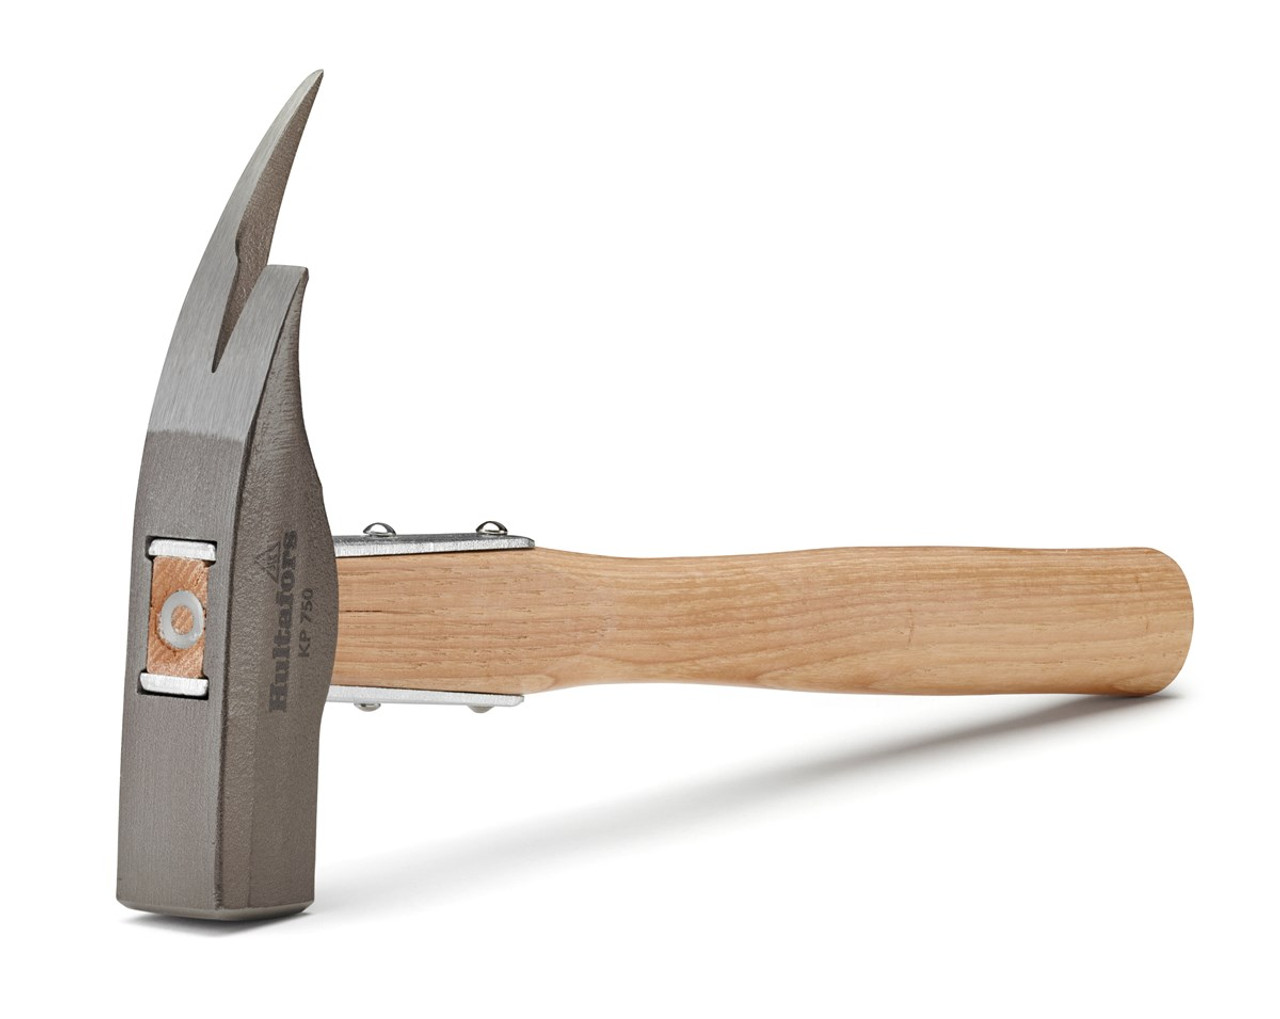 A similar hammer to the Martinez hammers, although older carpenters hammer technology. A perfectly balanced and strong hammer for carpenters with a hickory handle.